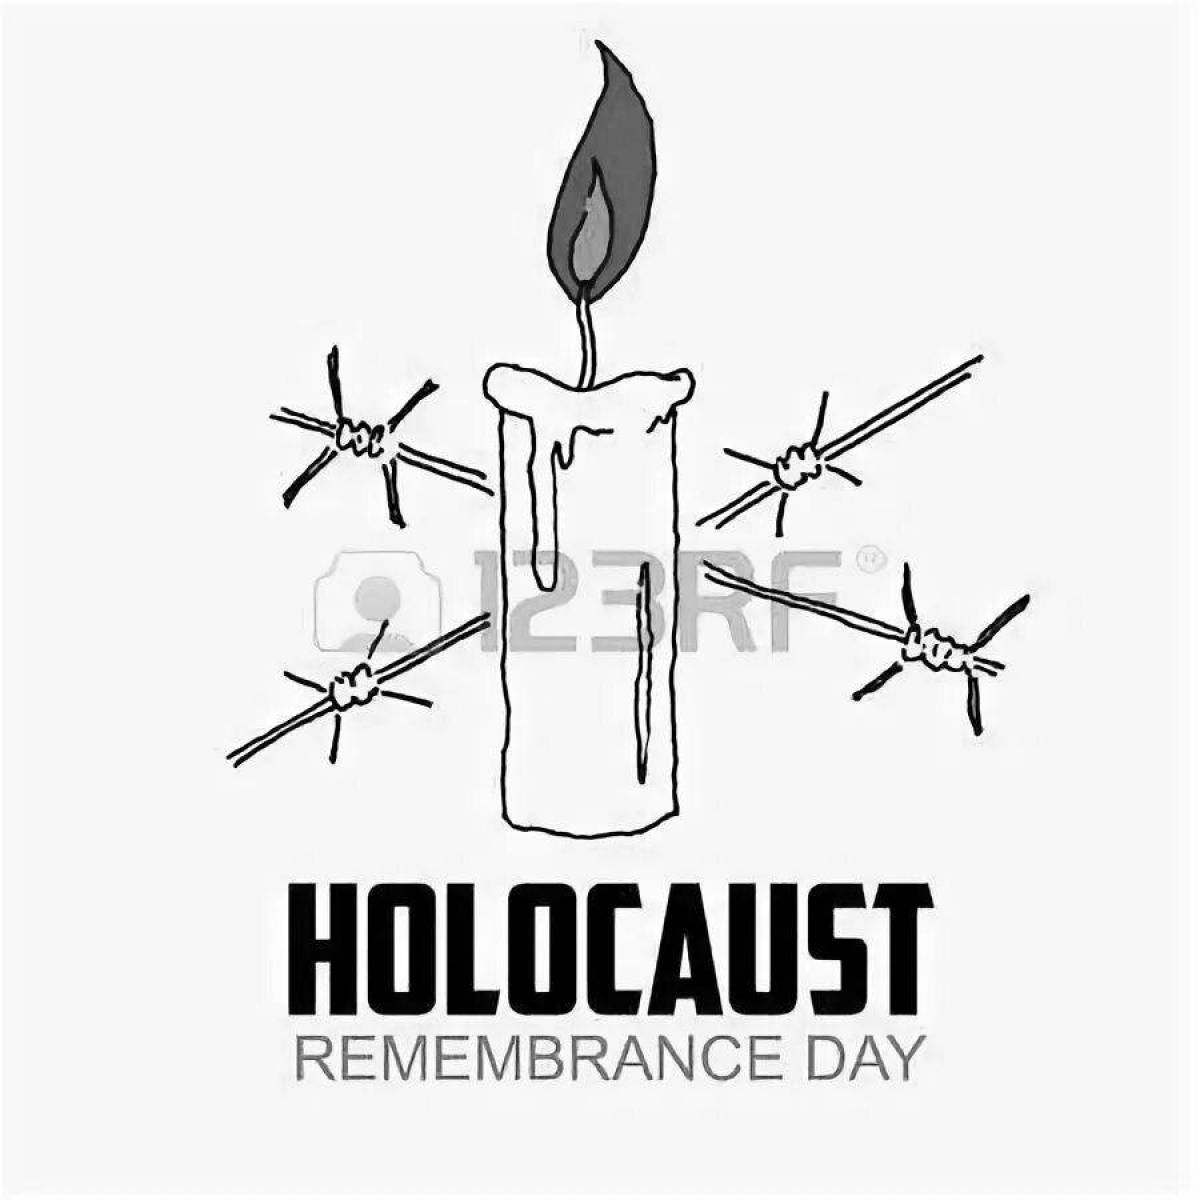 Wonderful coloring flower symbol of the Holocaust